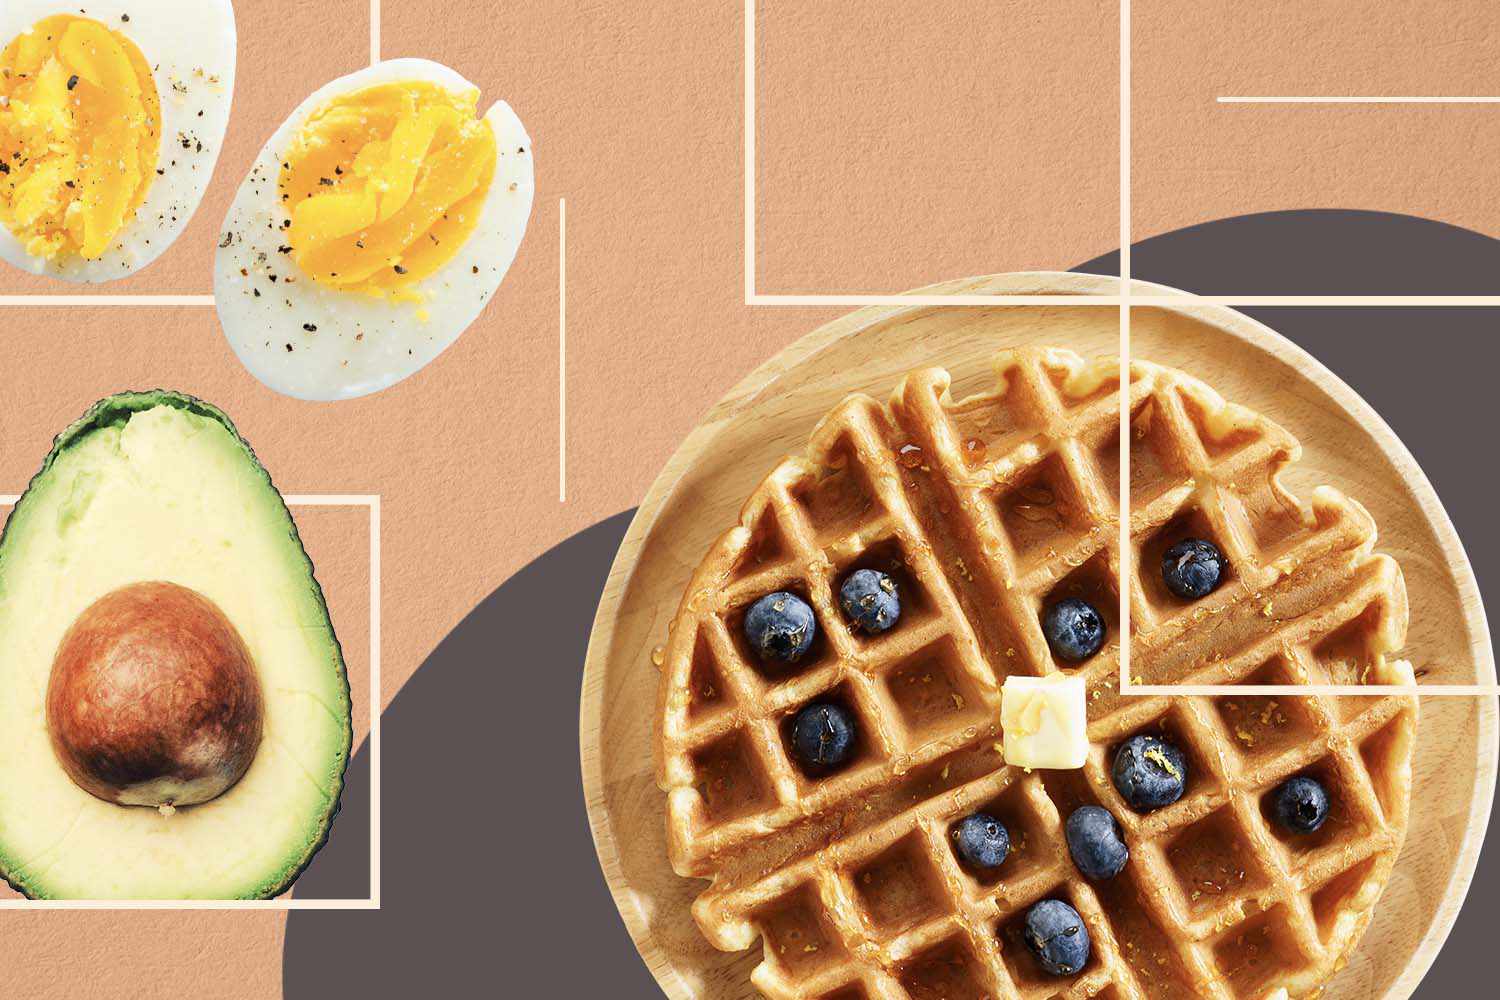 Second Trimester Pregnancy Meal Plan with Eggs, Avocado, and Waffles